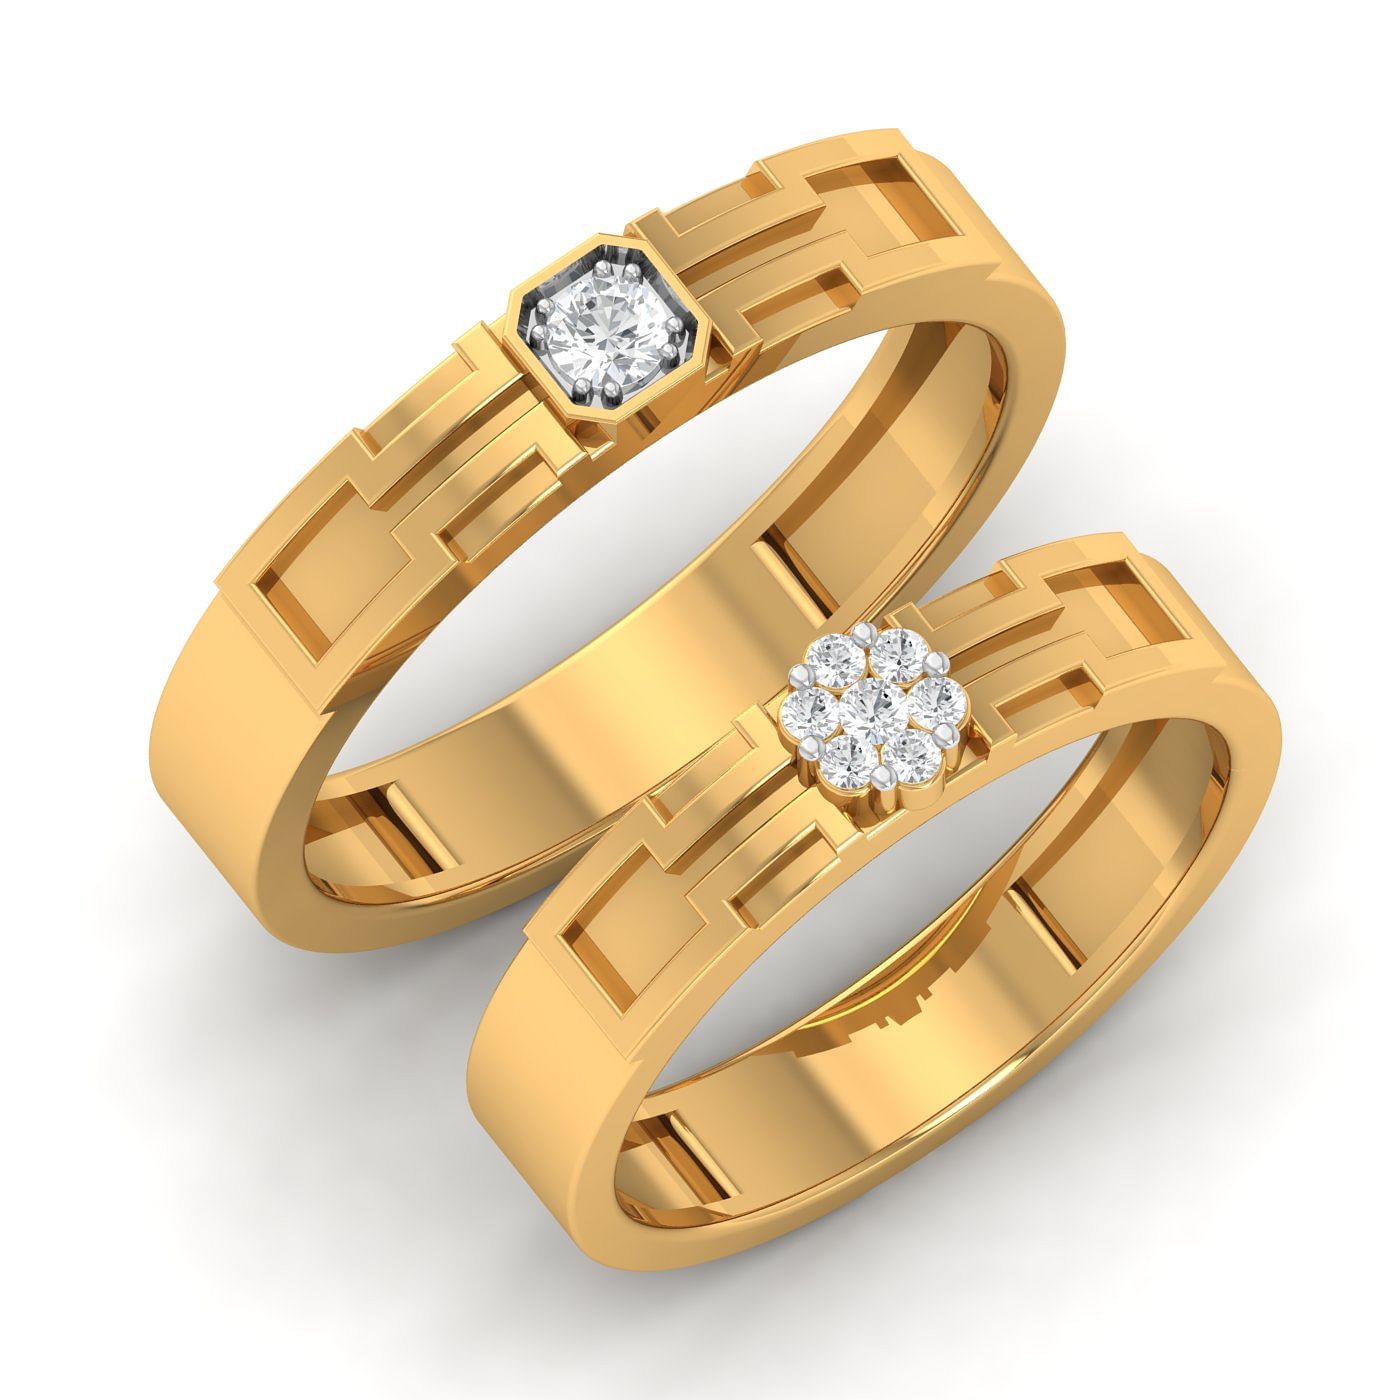 Xavier Modern Design Couple Rings Pure Yellow Gold